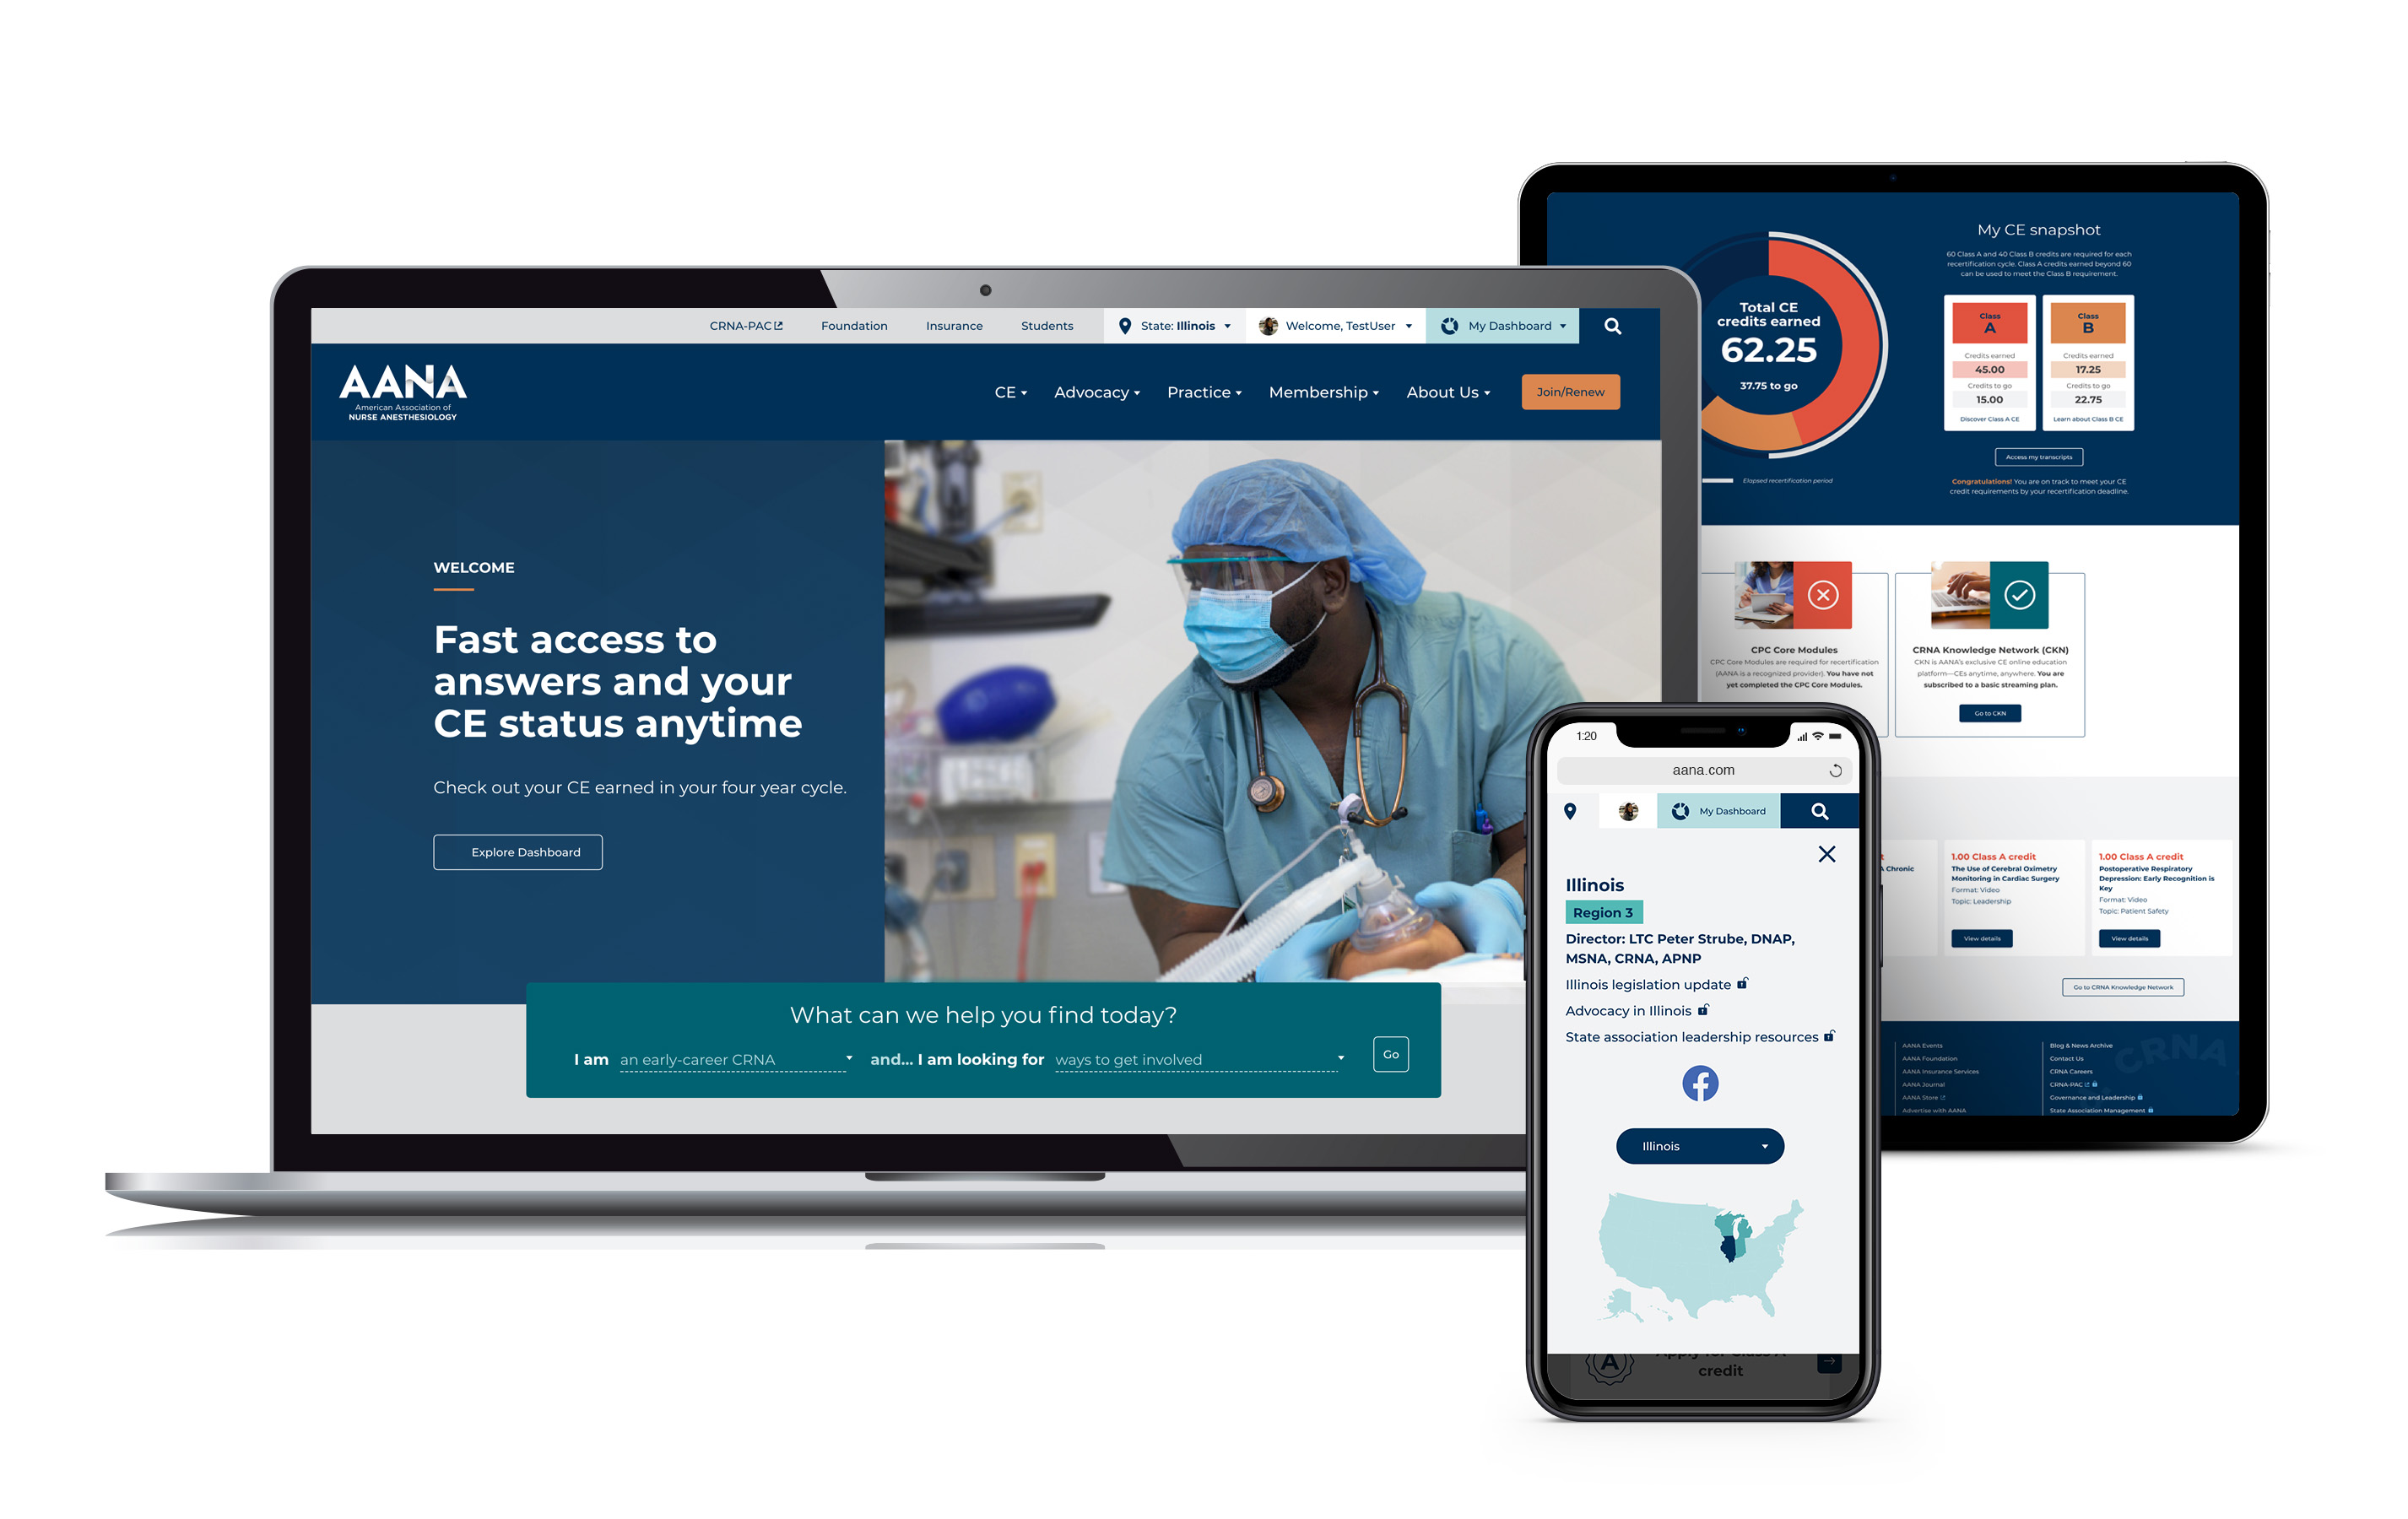 American Association of Nurse Anesthesiology website created by Vendi Advertising